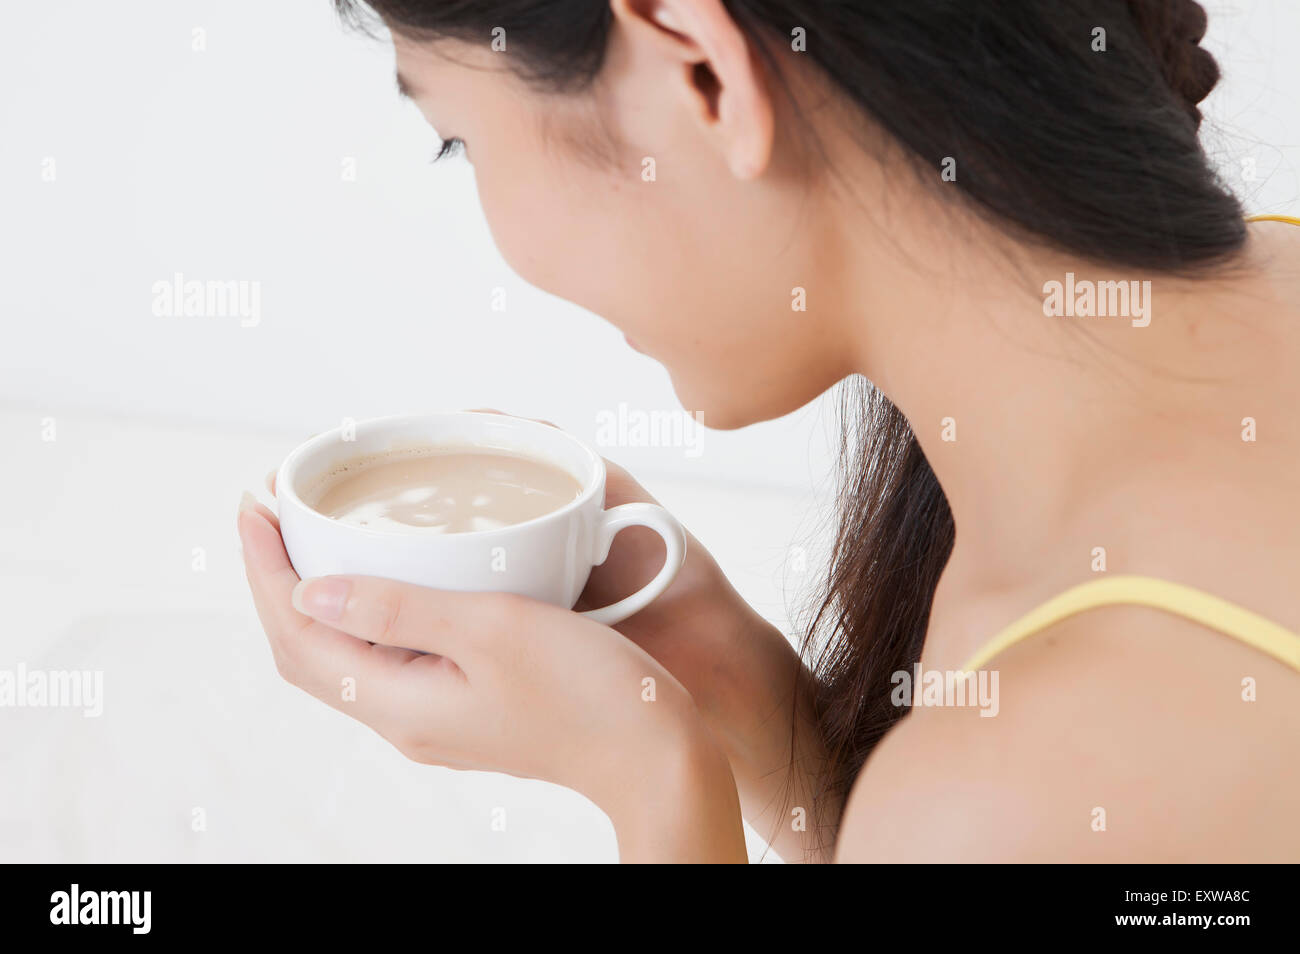 Young woman holding a cup, Stock Photo